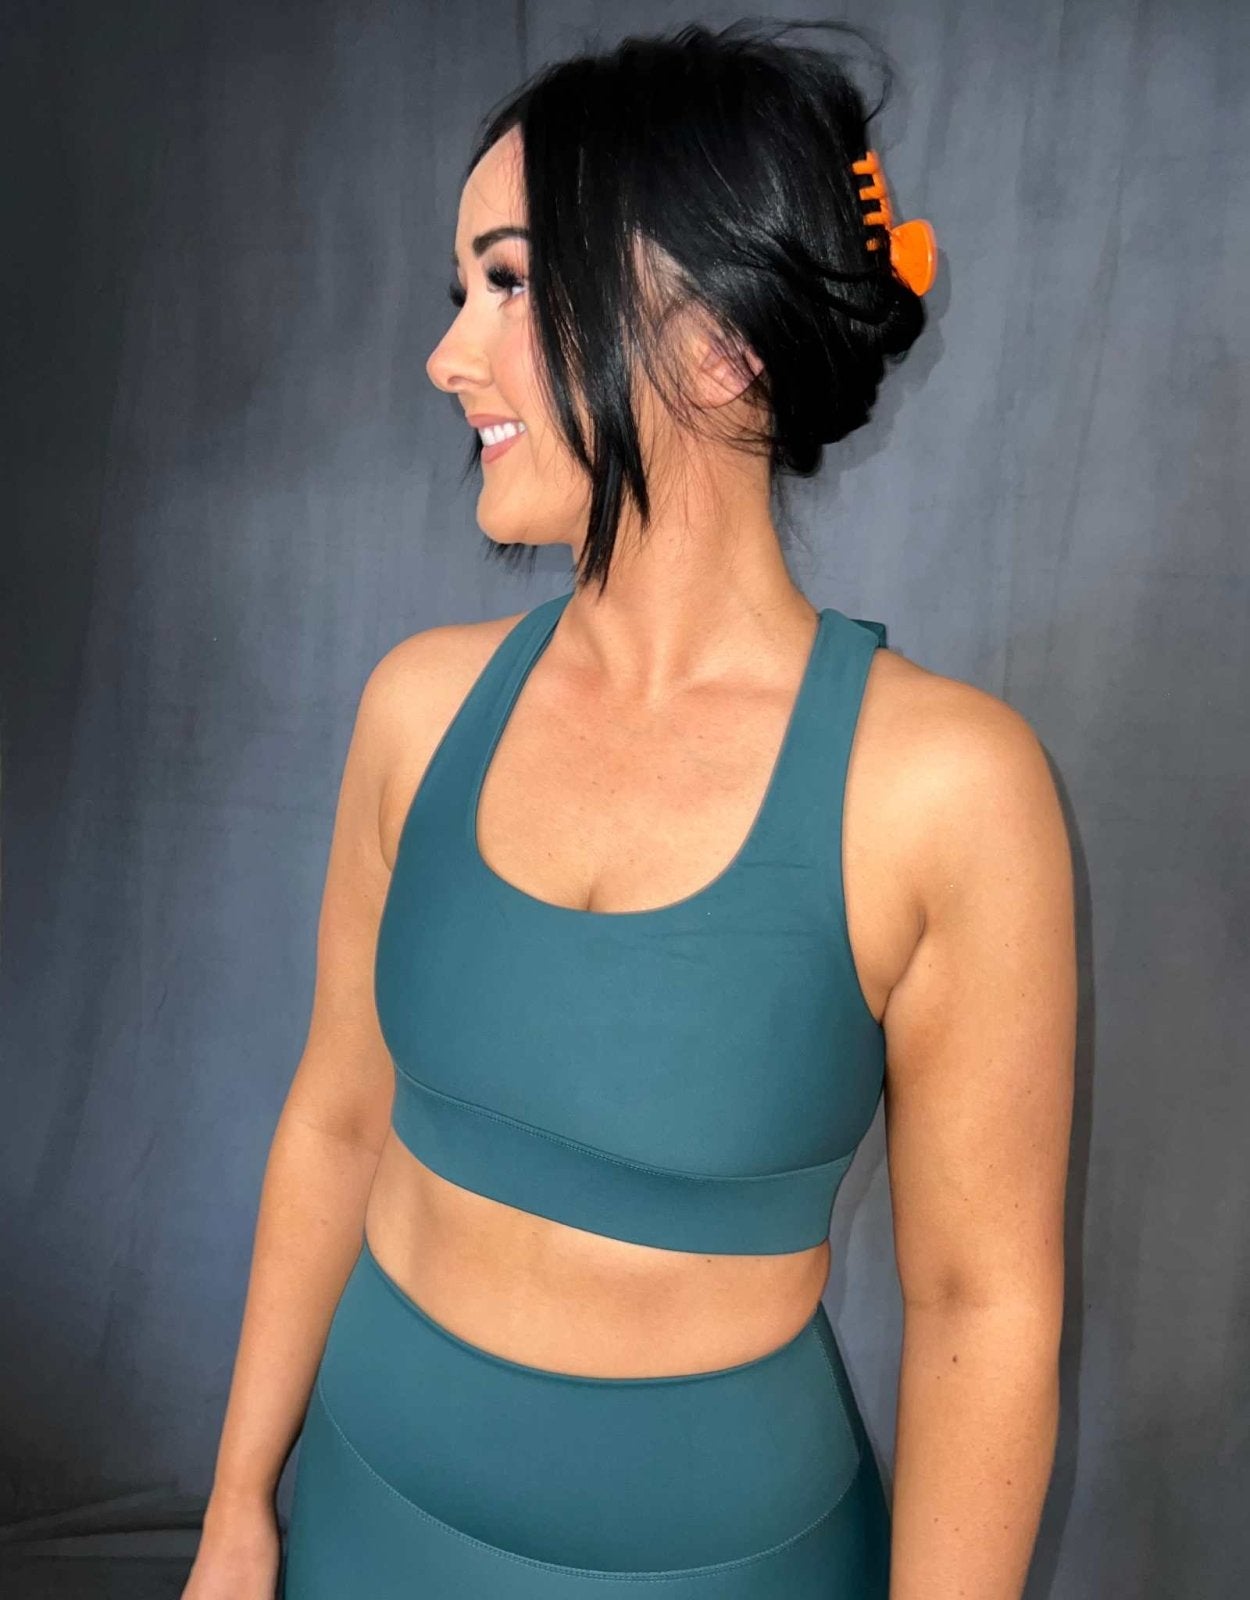 Girl standing wearing green activewear from vocus vit. she has a sports bra and shorts on. Vocus vit is a sustainable women's activewear brand that uses recycled materials and ethical manufacturing. Based in Northern Ireland. Shipping worldwide.Sizes XS (8) TO XXL (18).